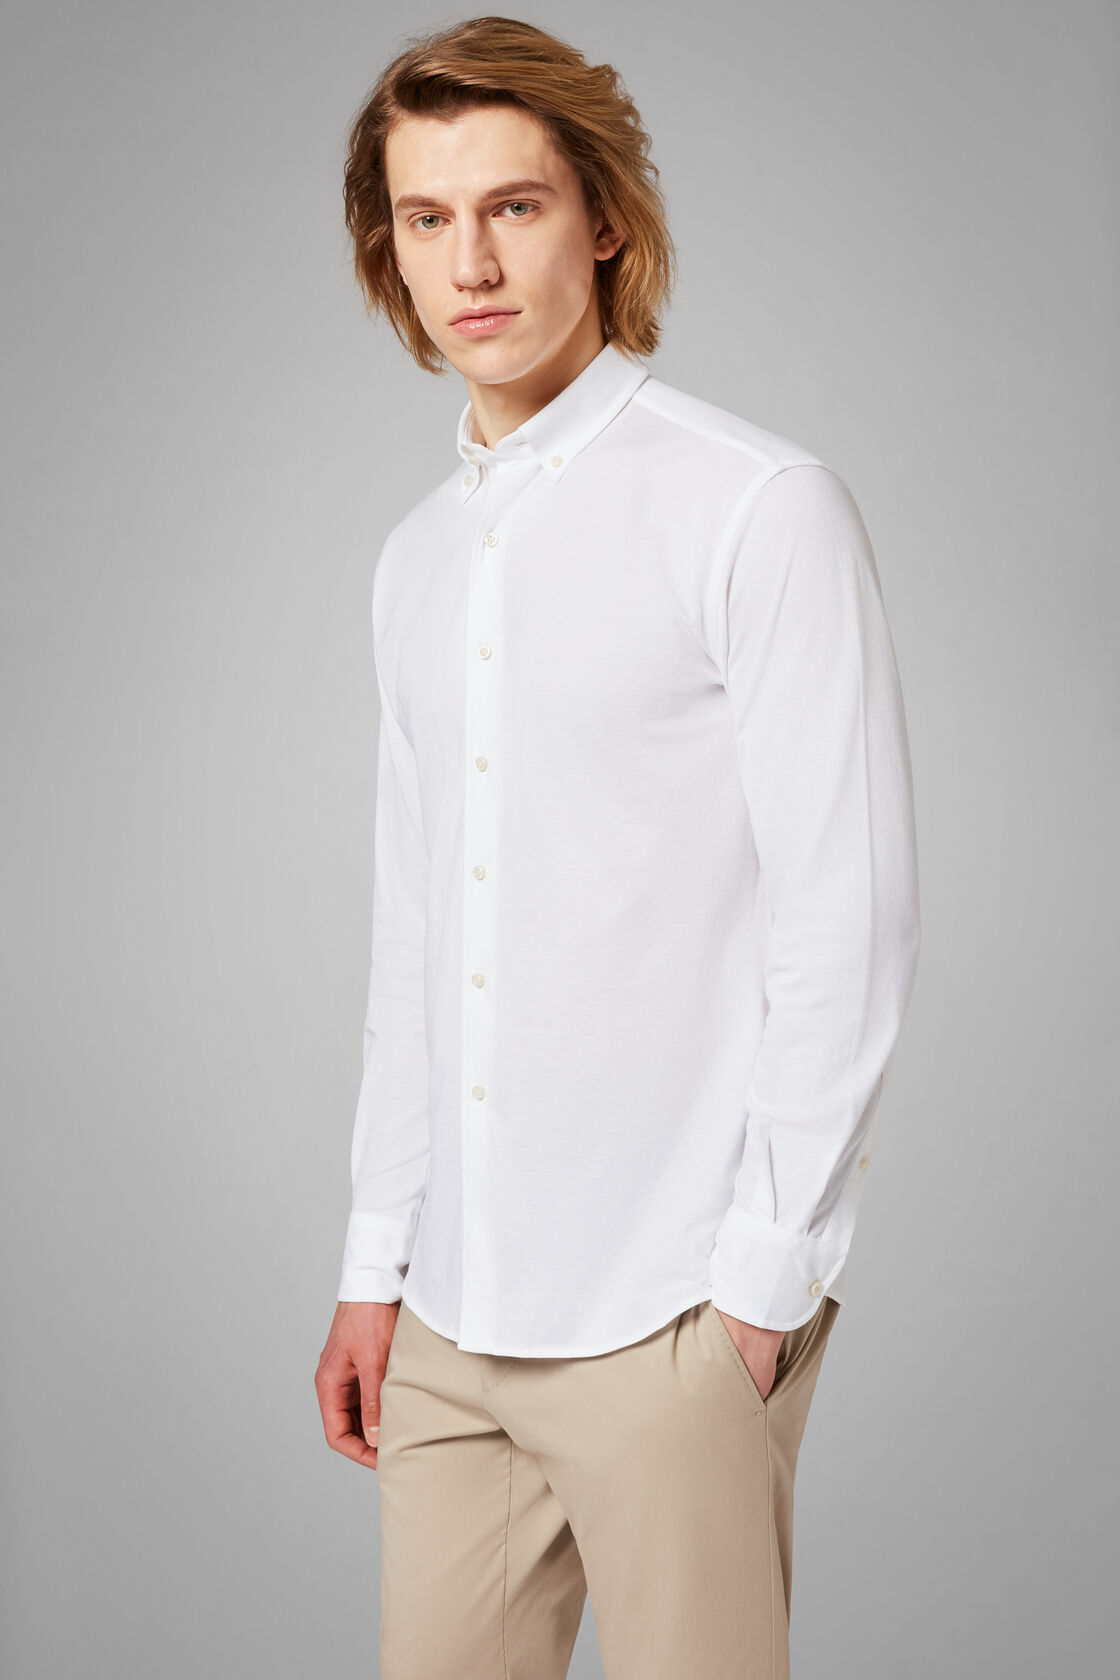 Regular Fit White Casual Shirt With Button Down Collar | Boggi